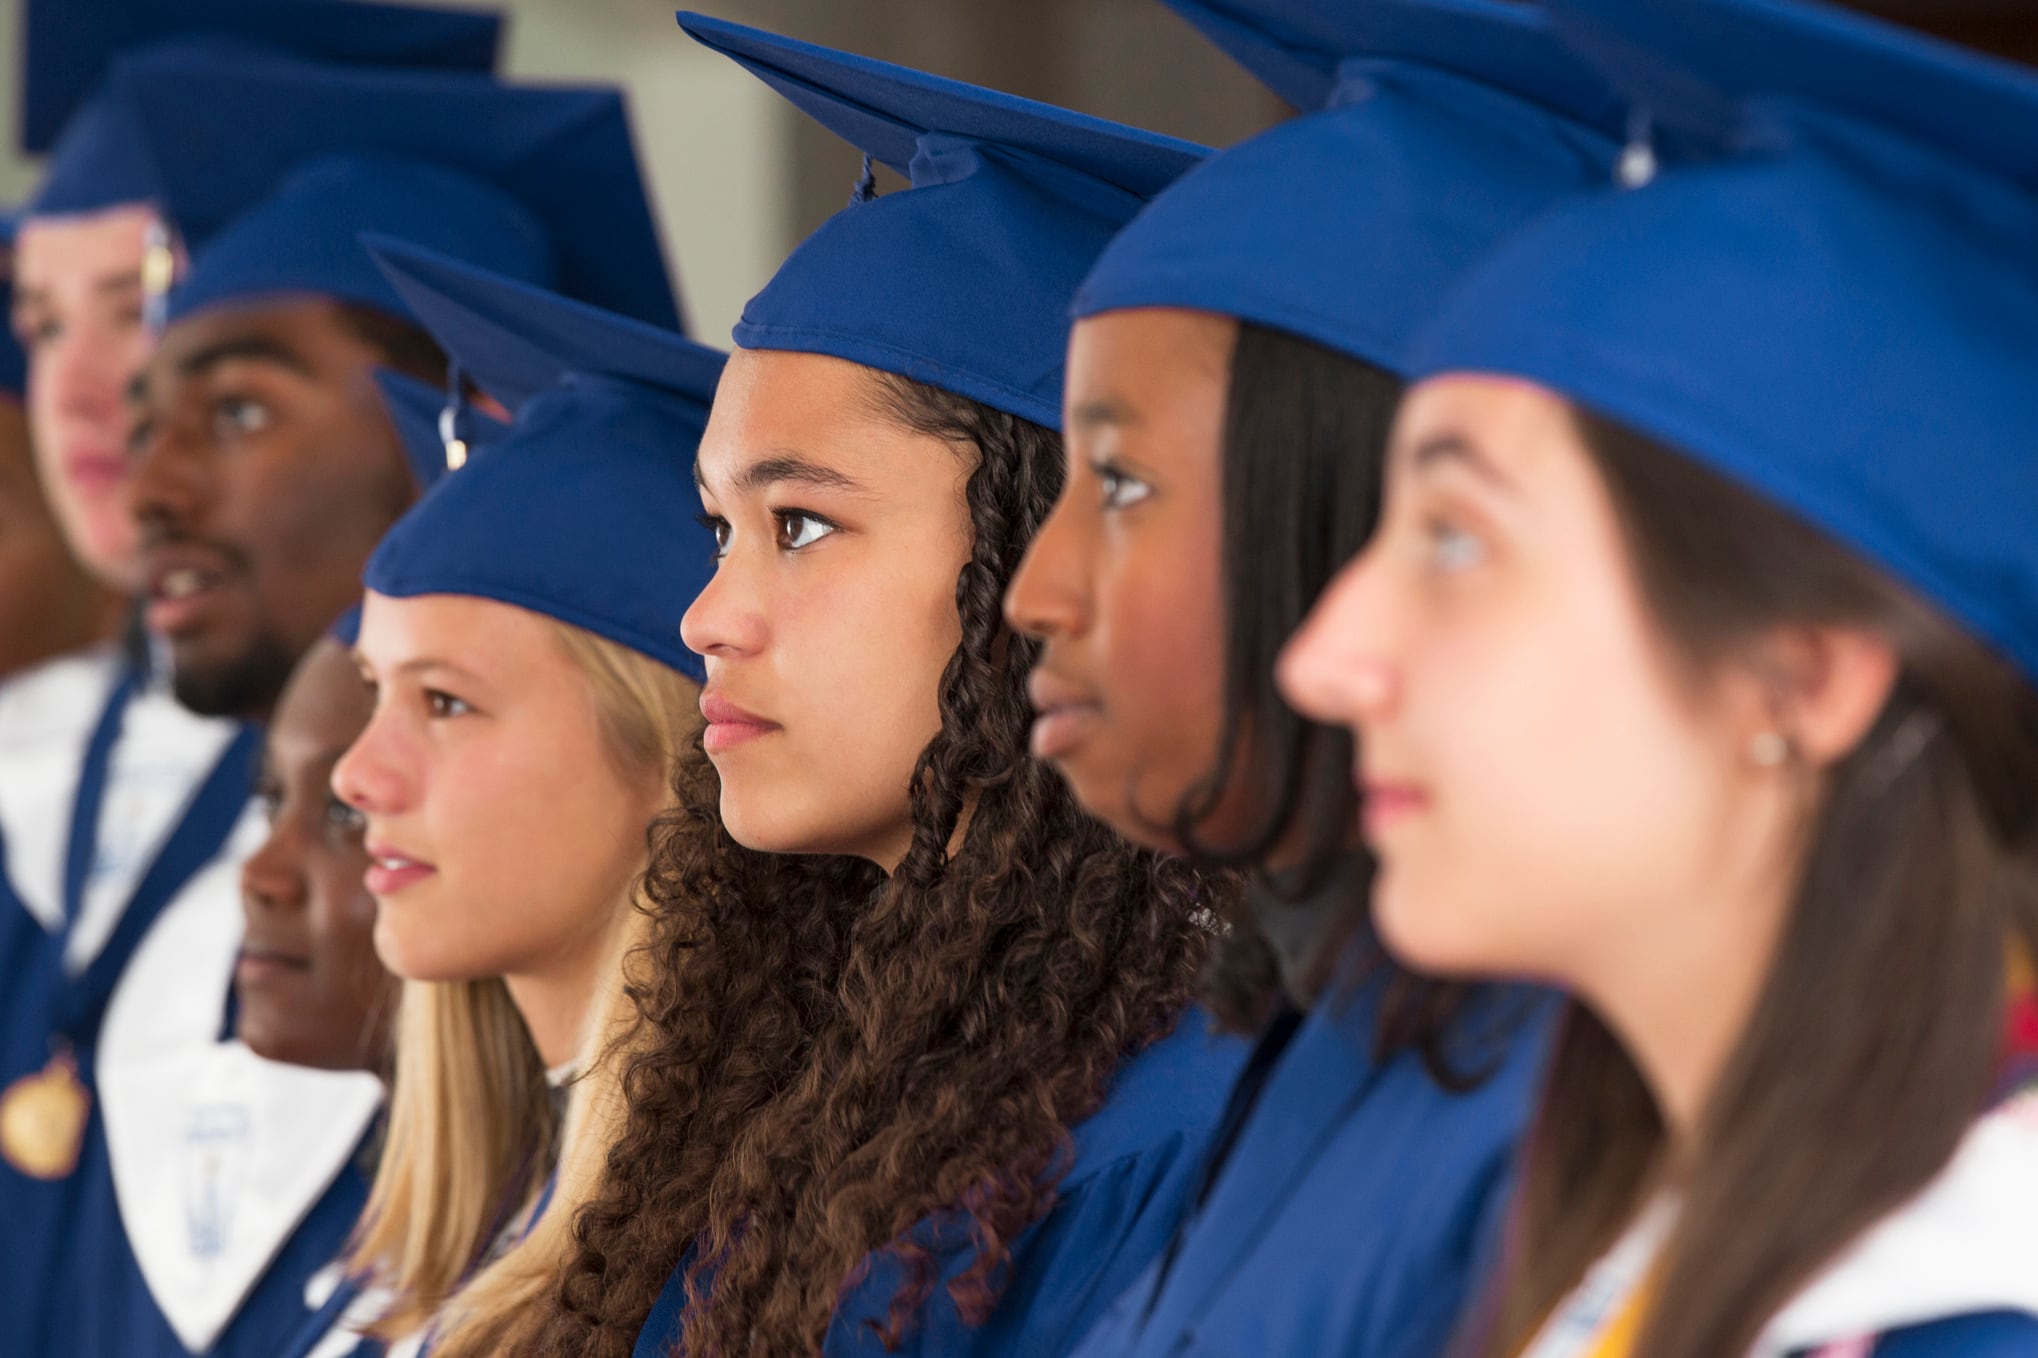 Seven high school students dressed in blue caps and gowns stand for their graduation.